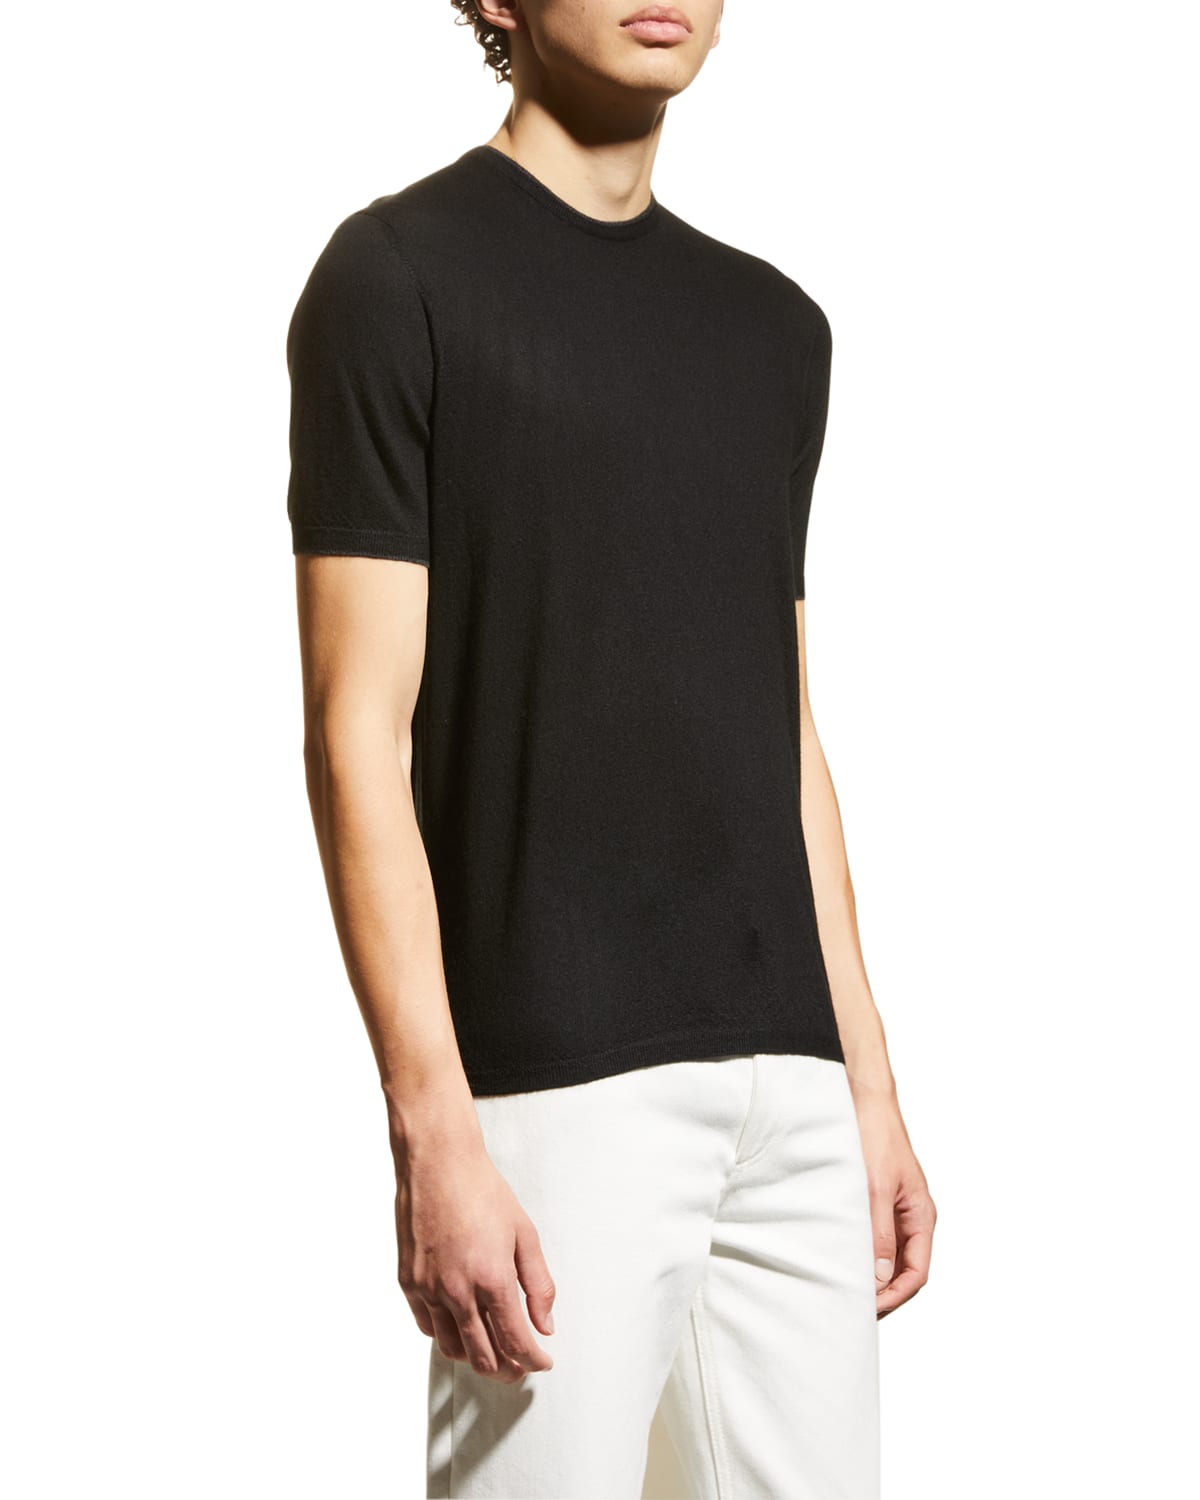 Nomad Men's Cashmere T-shirt W/ Tipping In Black/charcoal